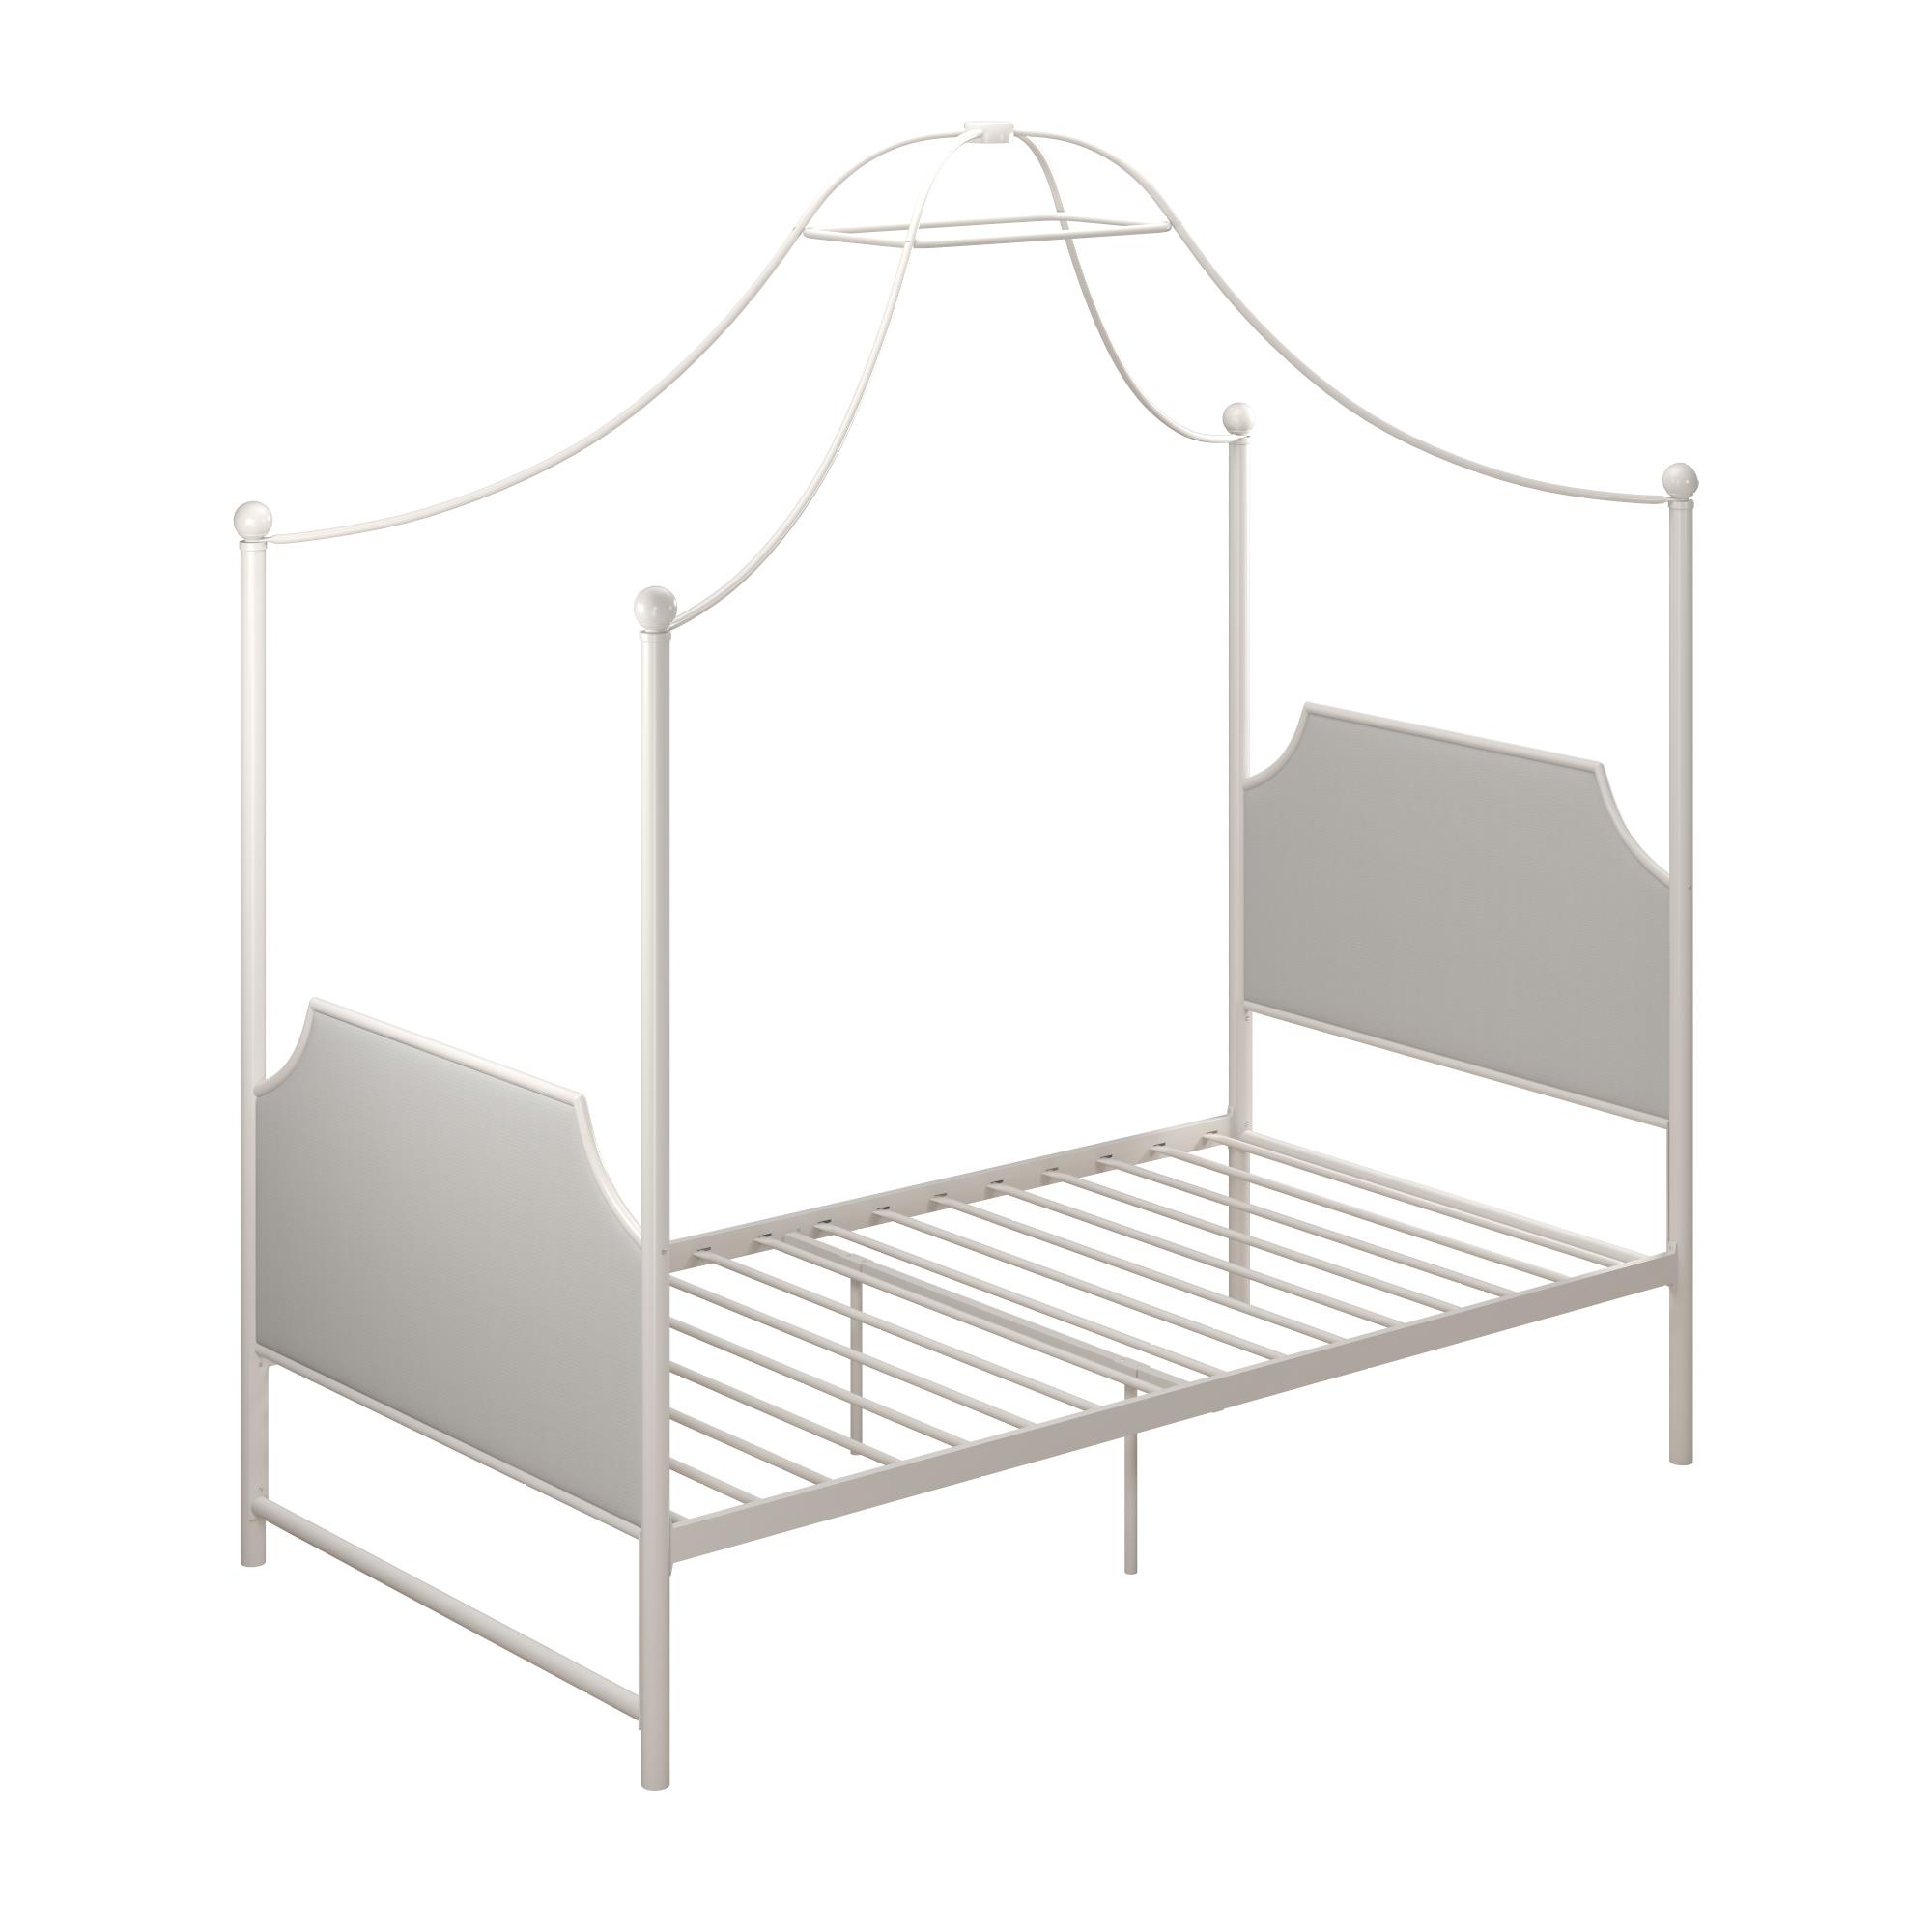 Little Seeds Monarch Hill Clementine Canopy Bed, Twin, Off White - image 4 of 10